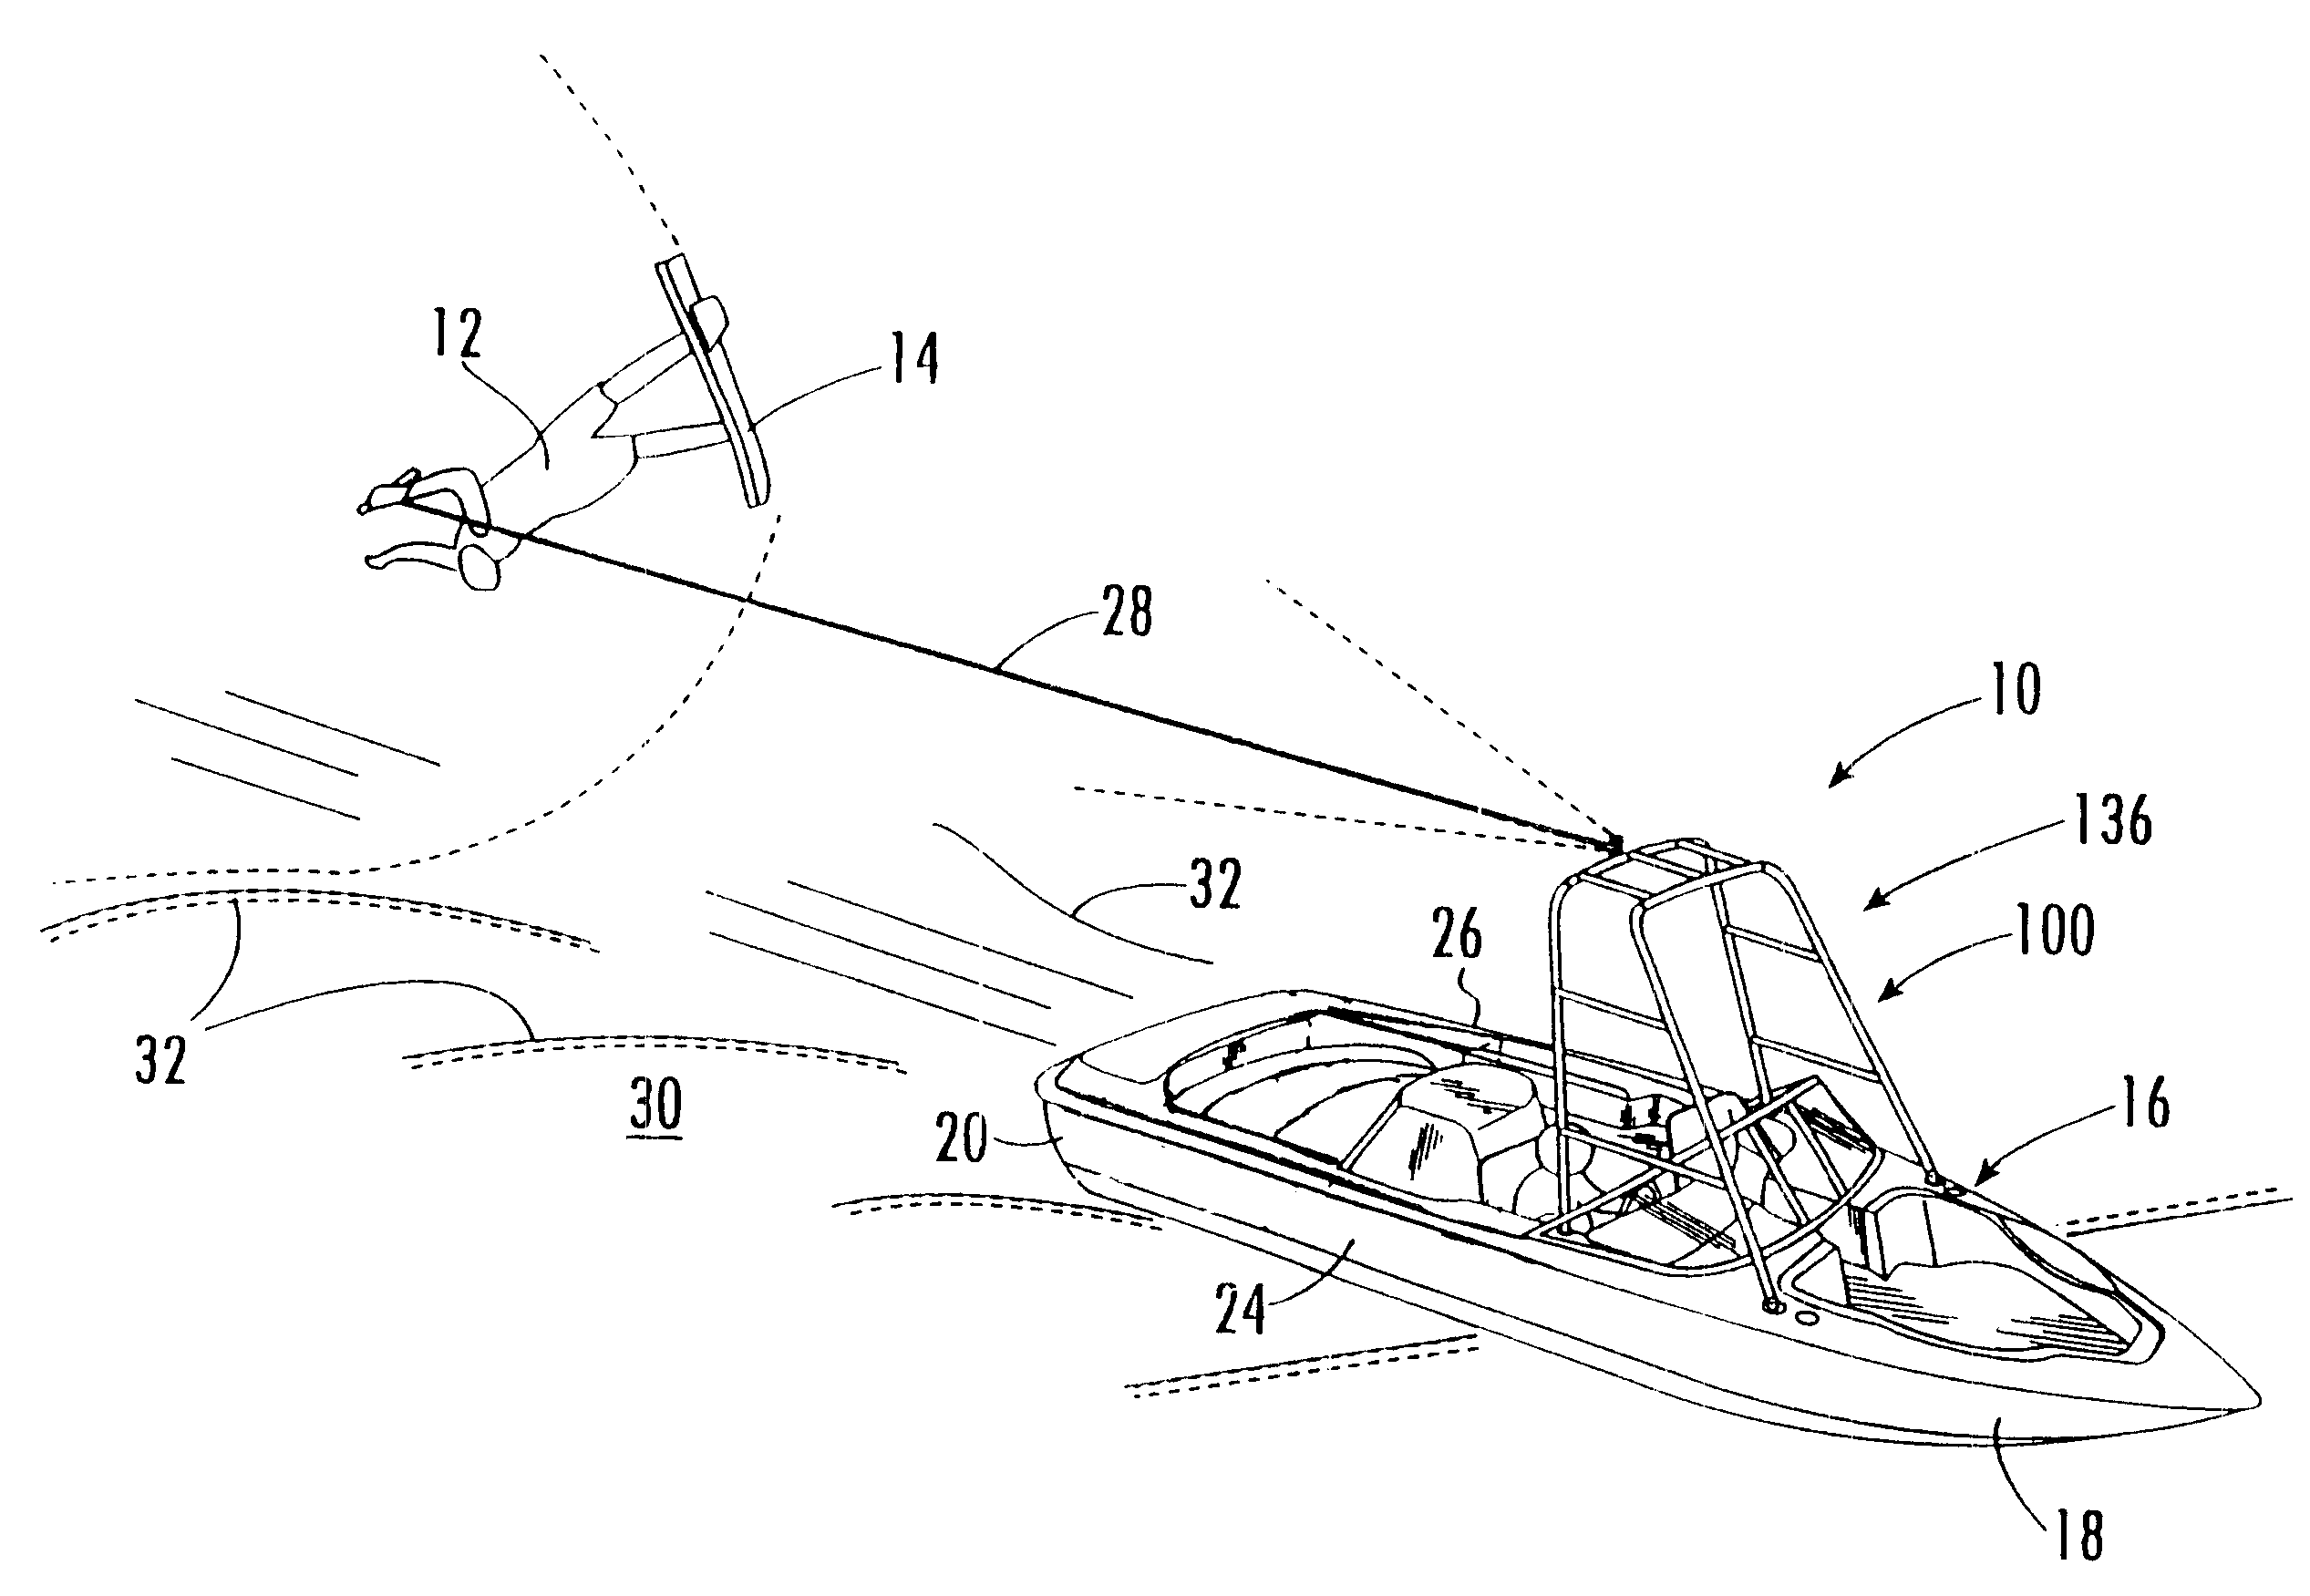 Water sport towing apparatus and method